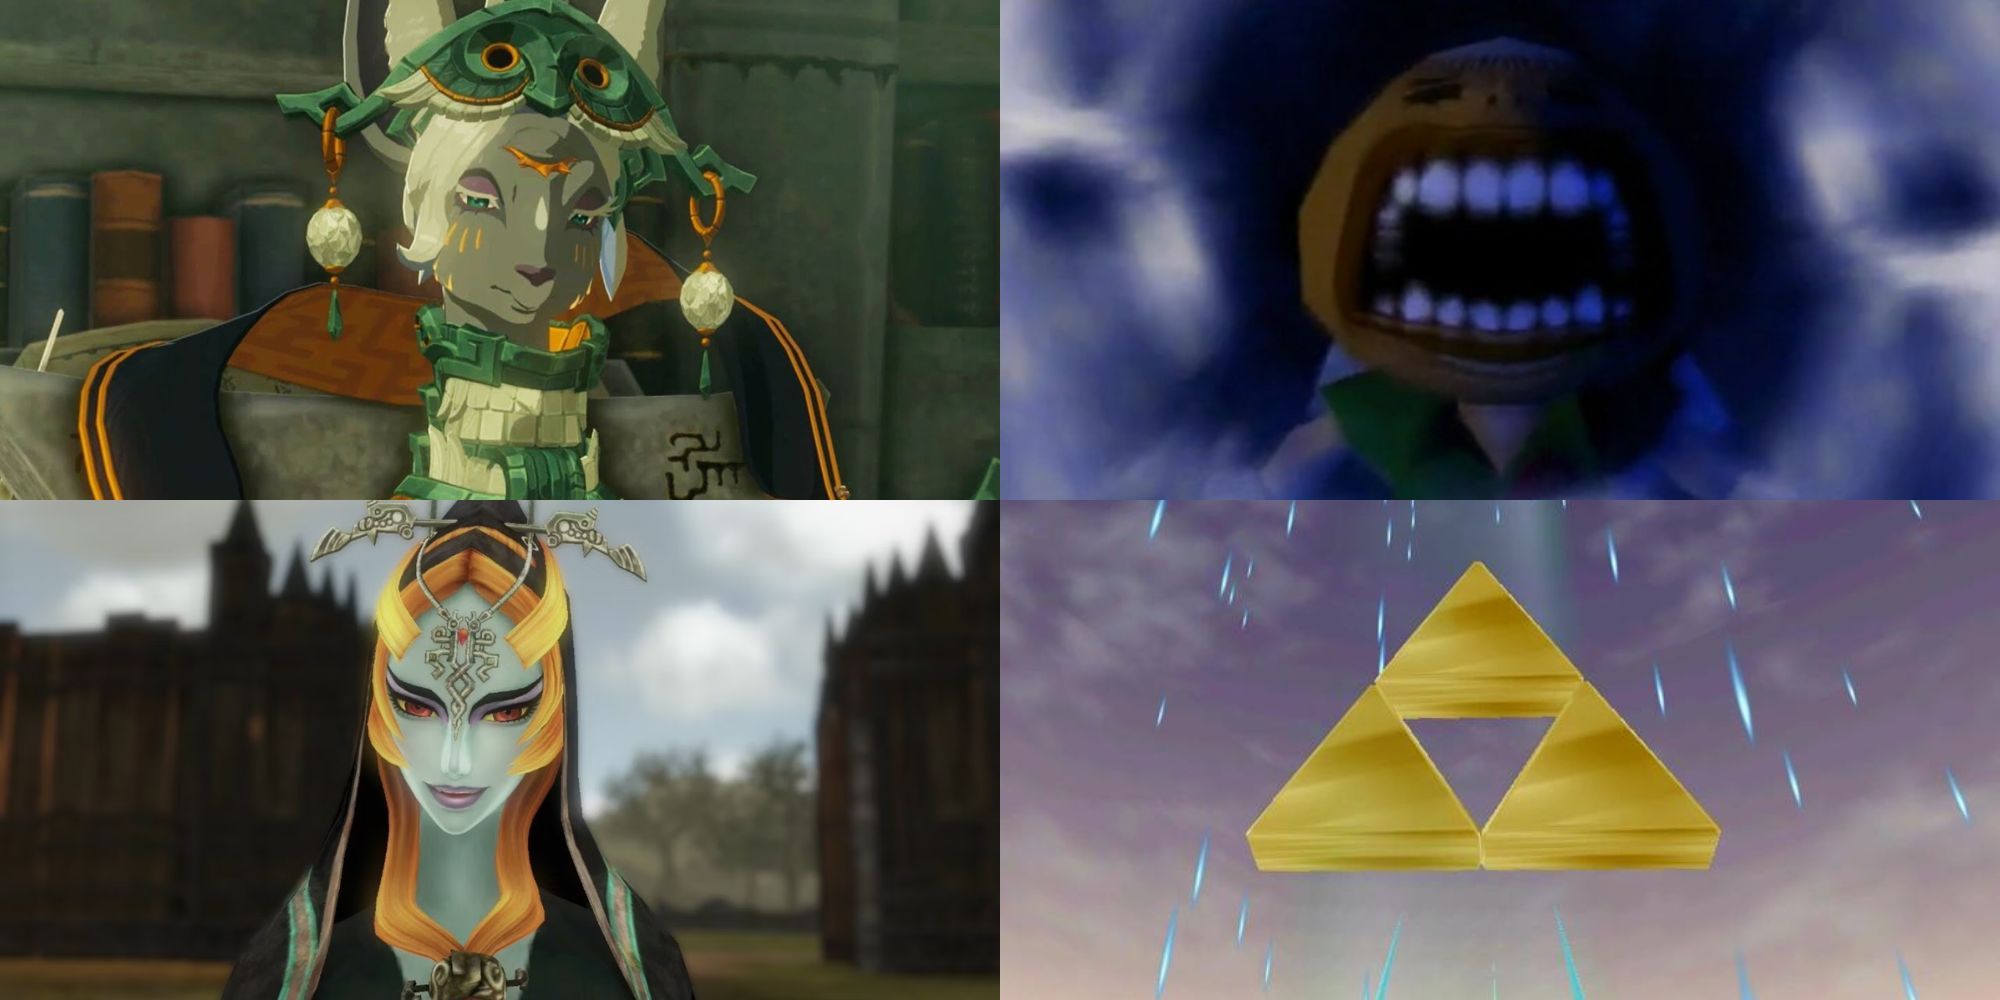 A collage of some of the most popular Legend of Zelda fan theories: The Zonai's origins, the truth about Majora's Mask, the Gerudo turning into the Twili and the Fourth Triforce piece.